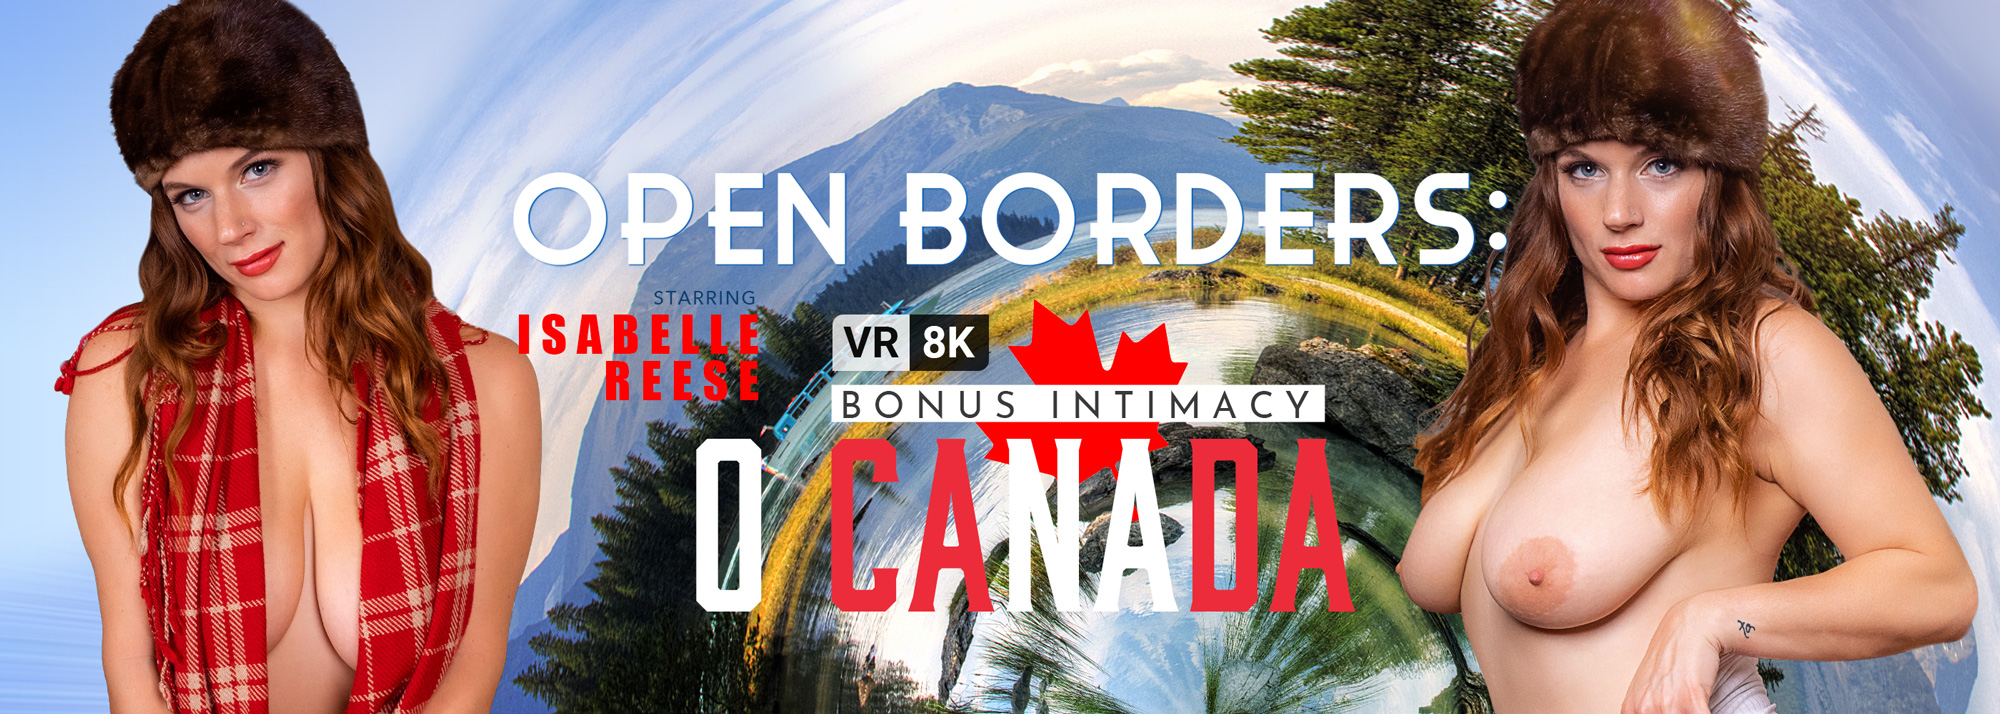 Open Borders: O Canada (Bonus Intimacy) - VR Porn Video, Starring: Isabelle Reese